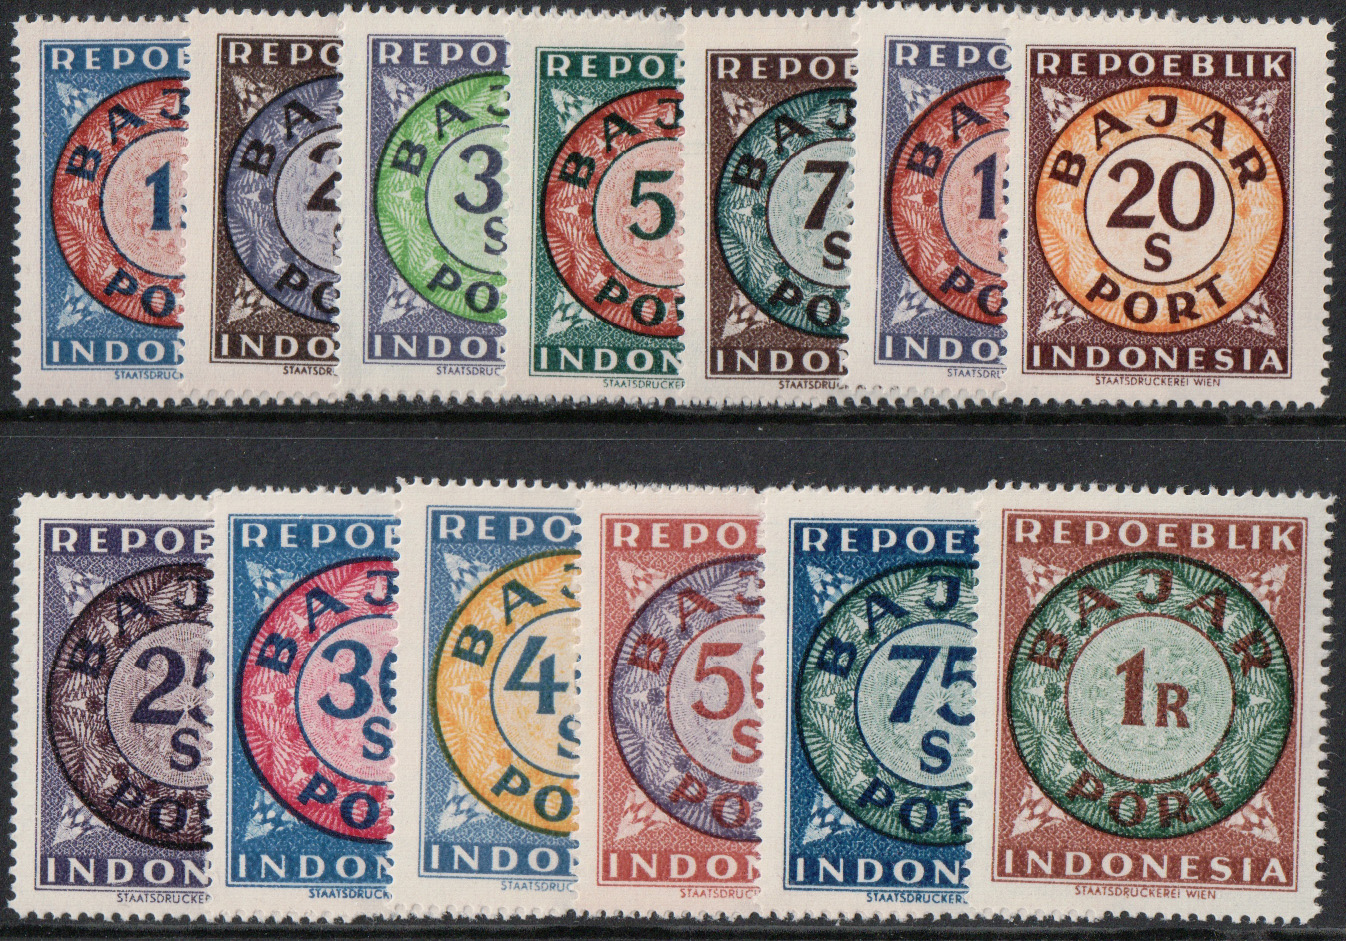  Indonesia Stamps 